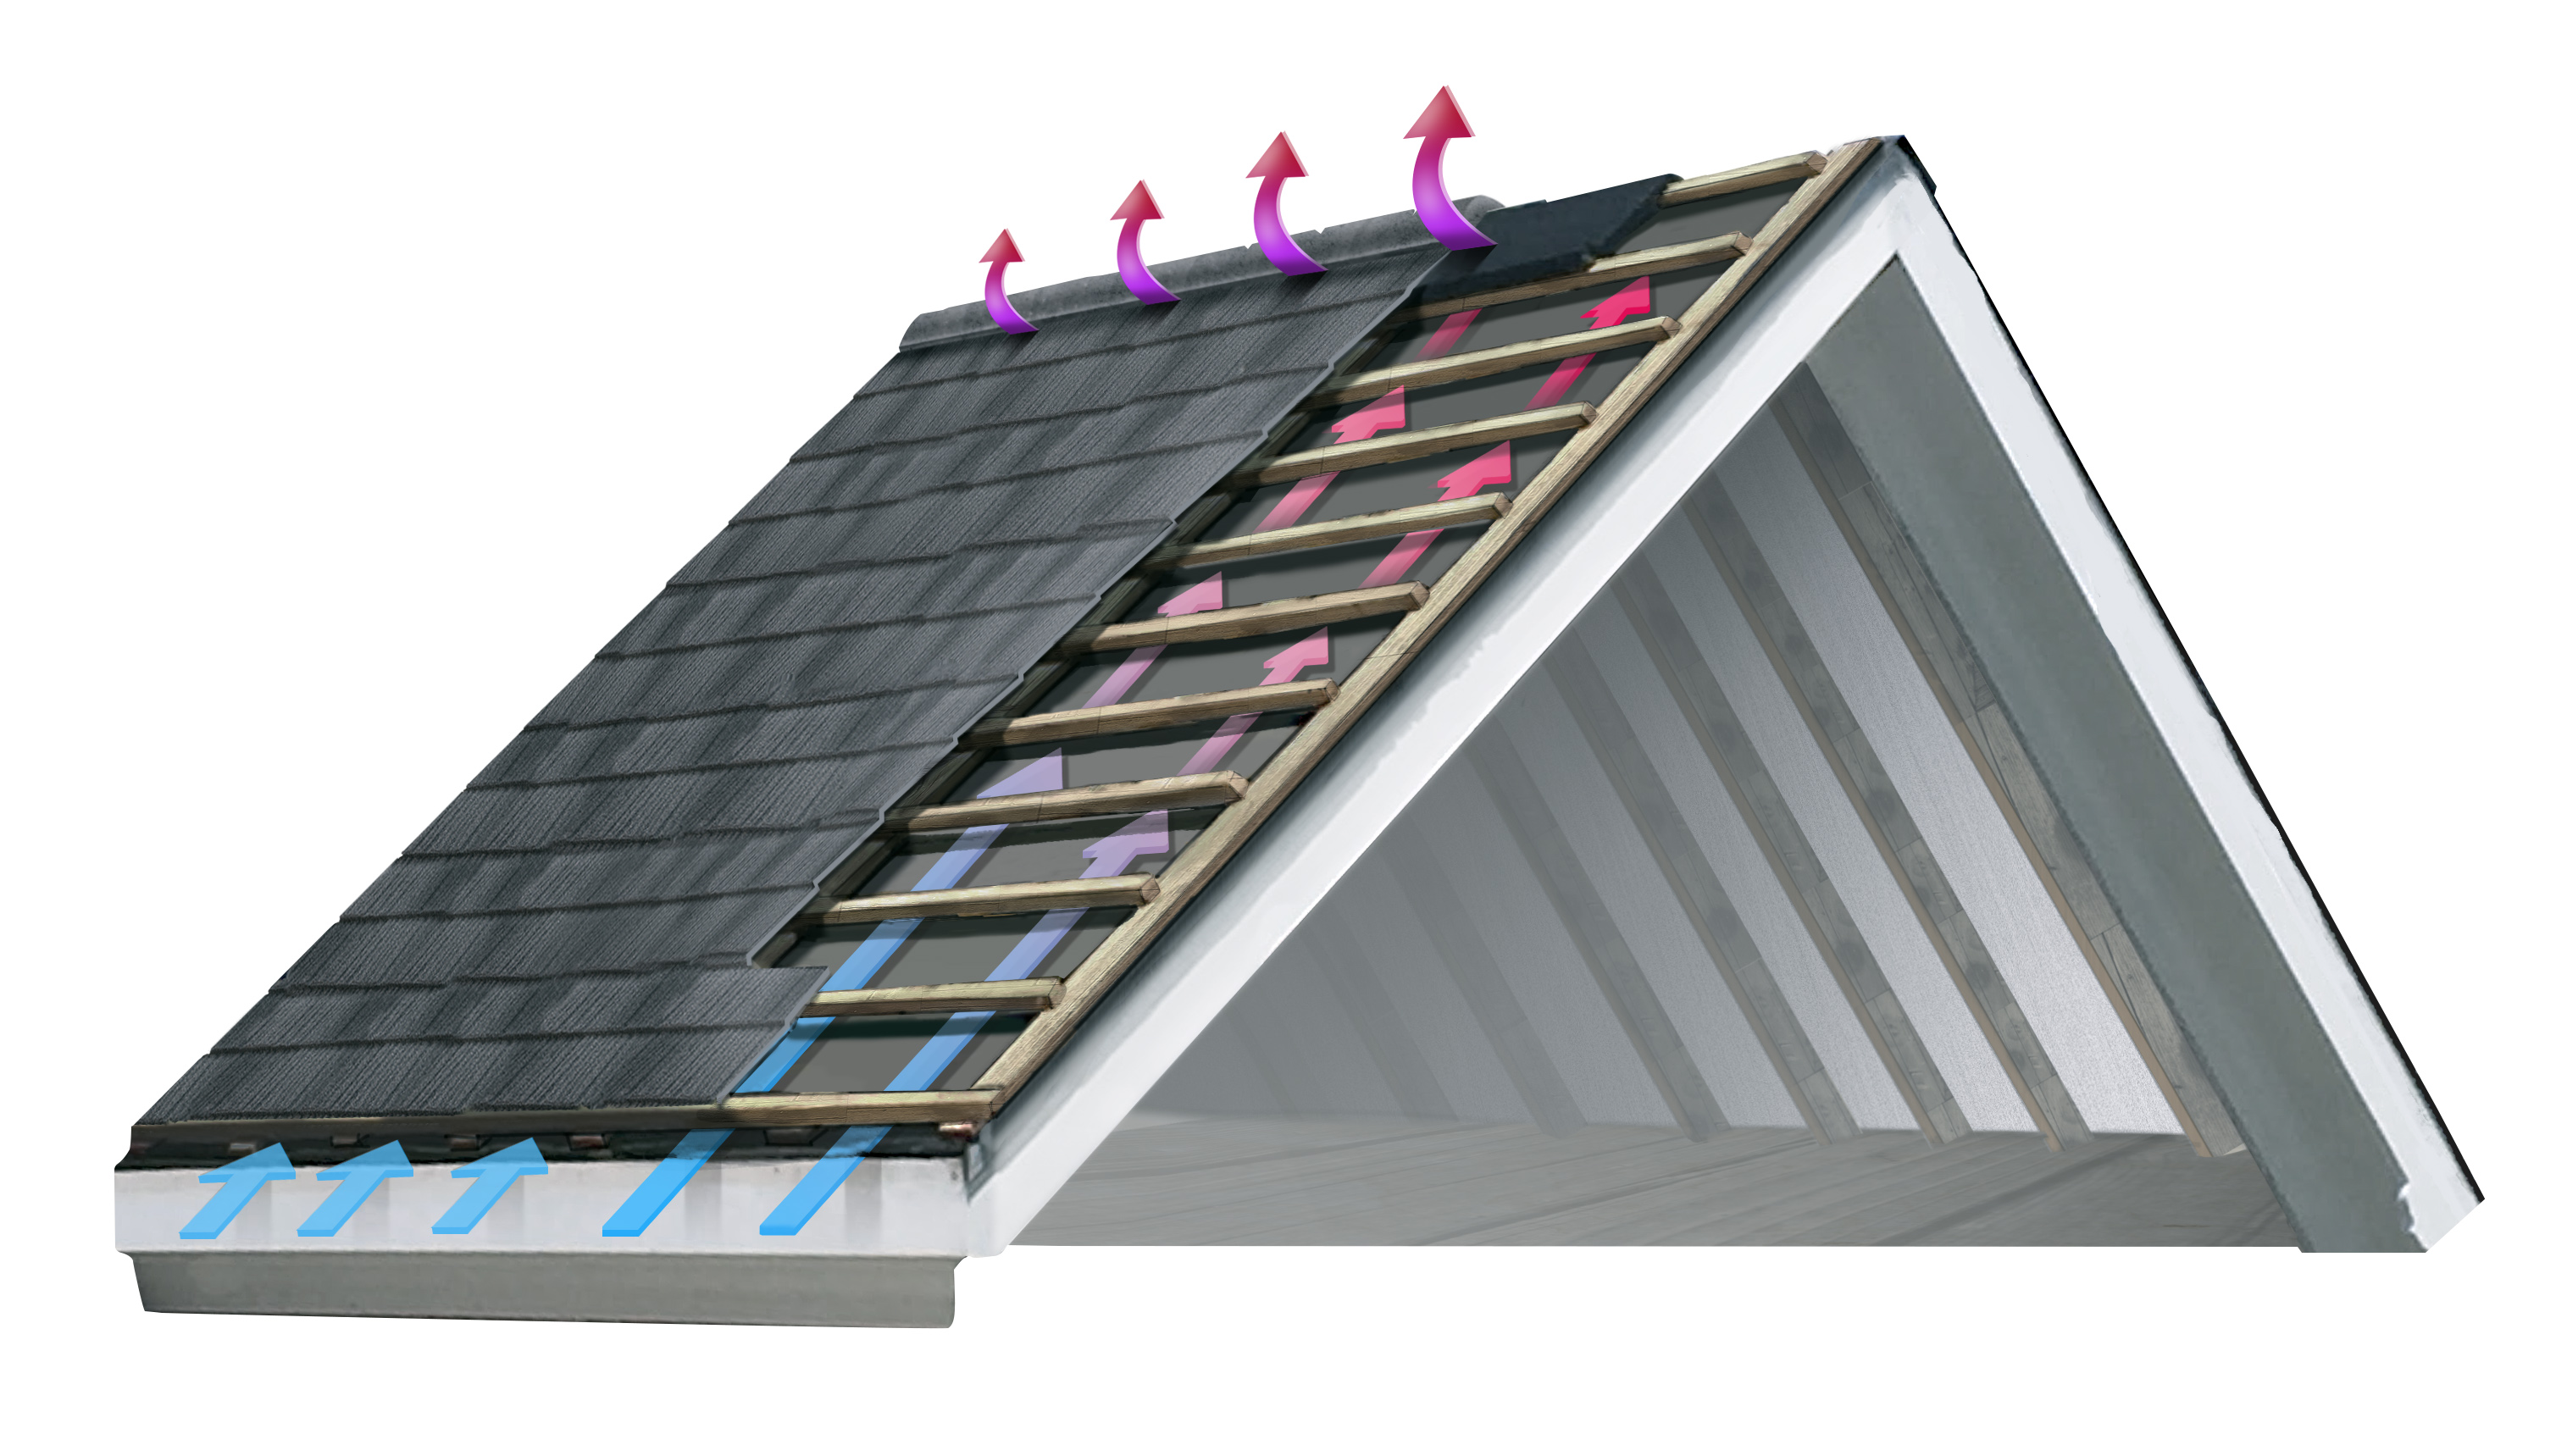 Image of a roof demonstrating the air flow when Above Sheathing Ventilation is used.